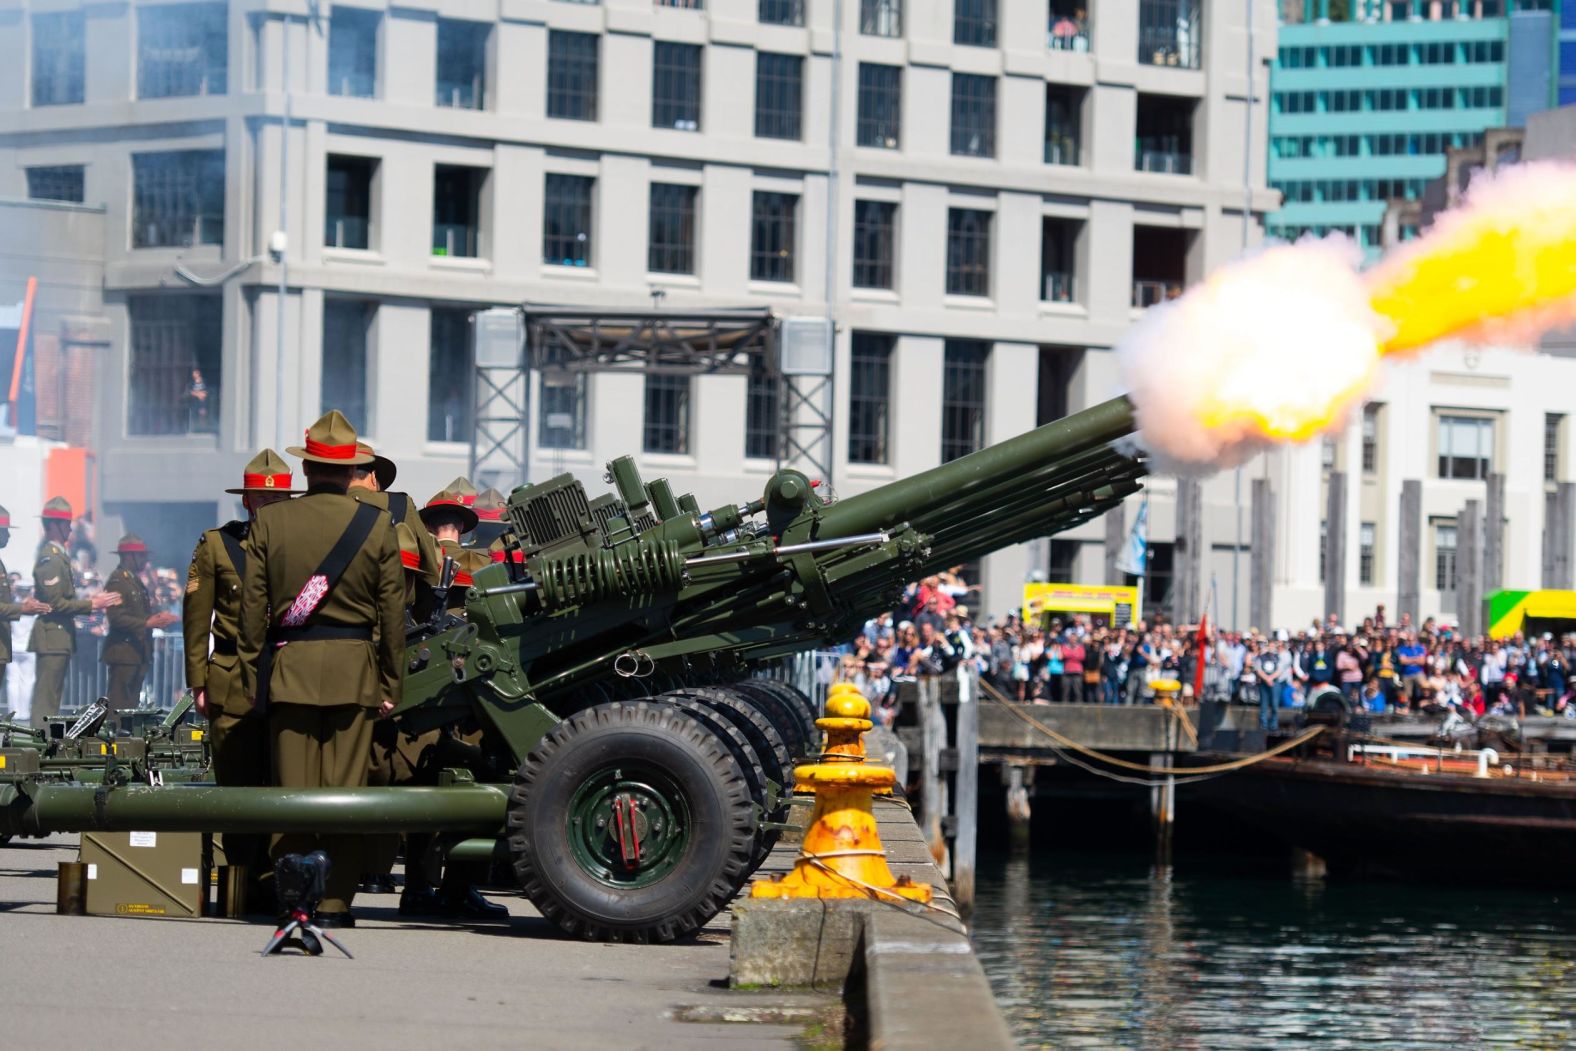 Ten New Zealand Army howitzer cannons fire during a 100-gun salute ceremony marking the 100th anniversary of the end of World War I at the Wellington Waterfront on Sunday.